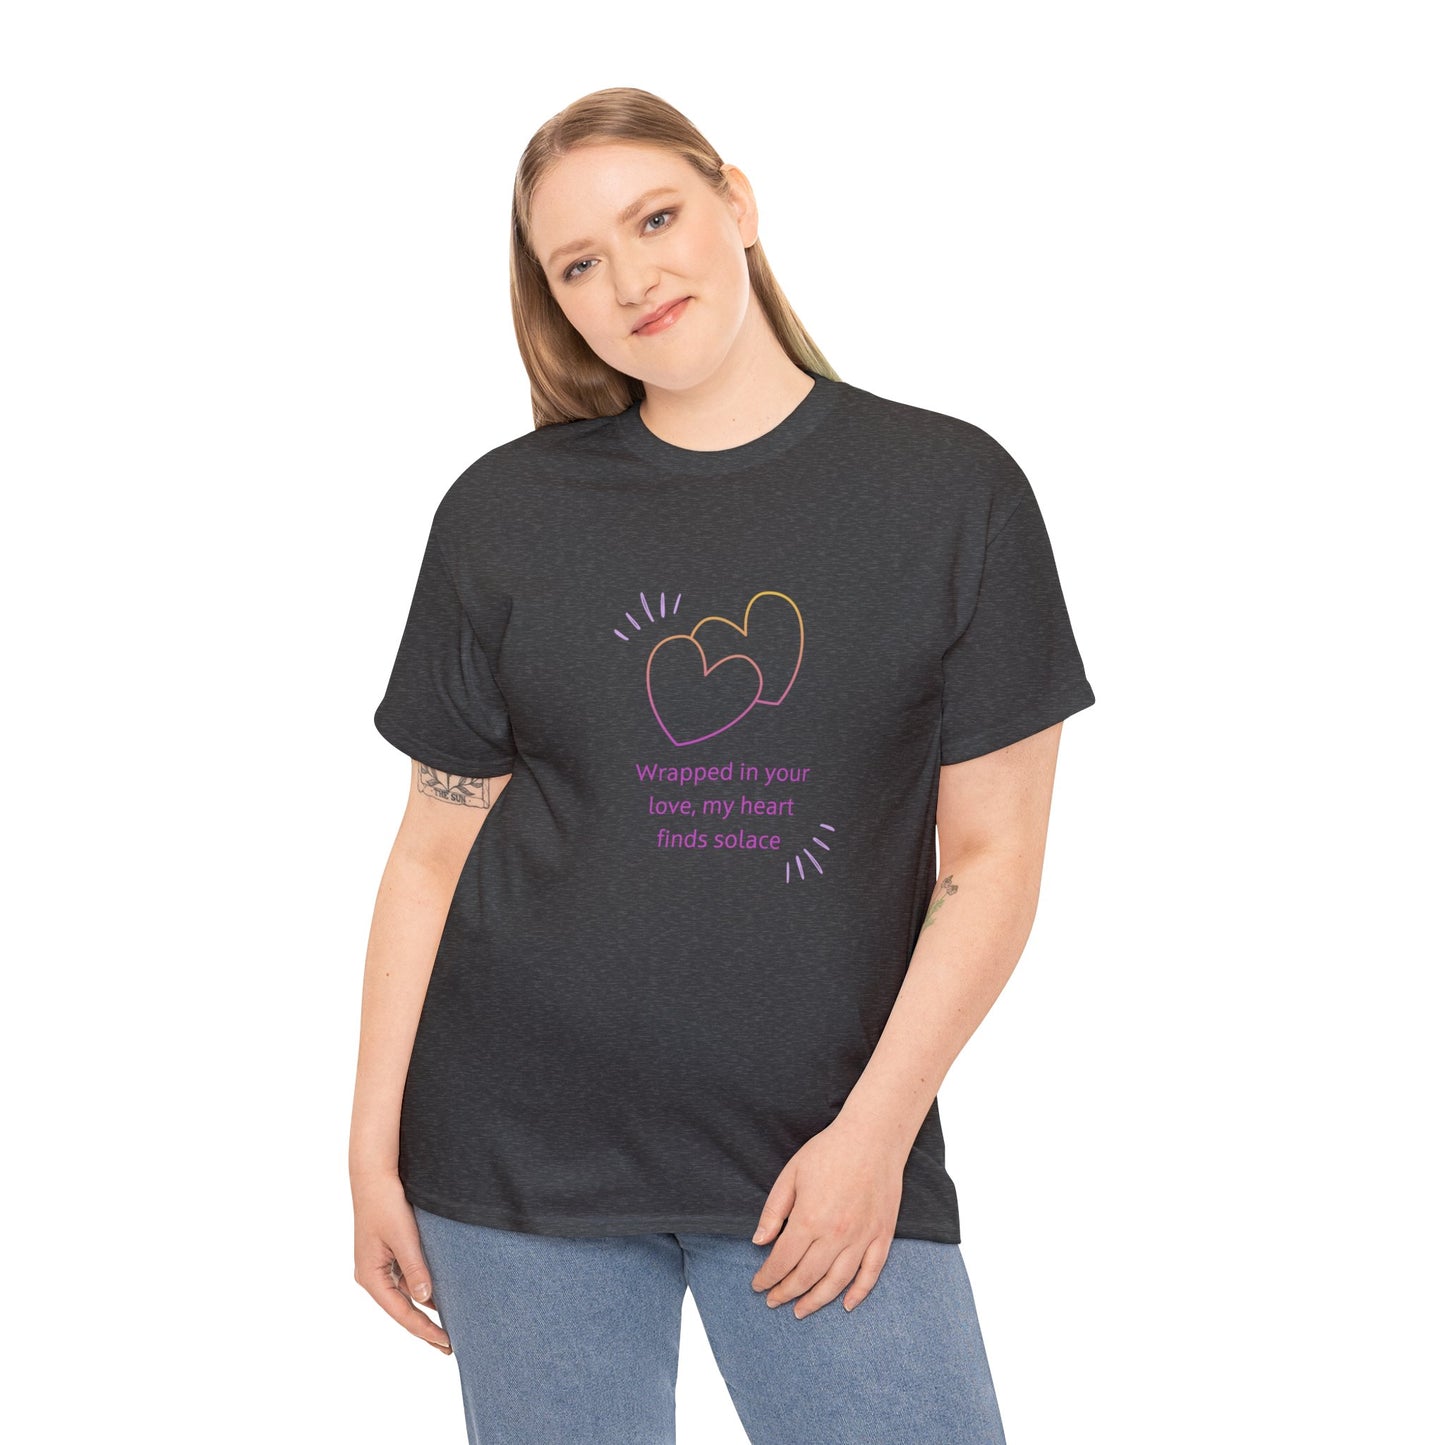 In your arms my heart finds solace T-Shirt